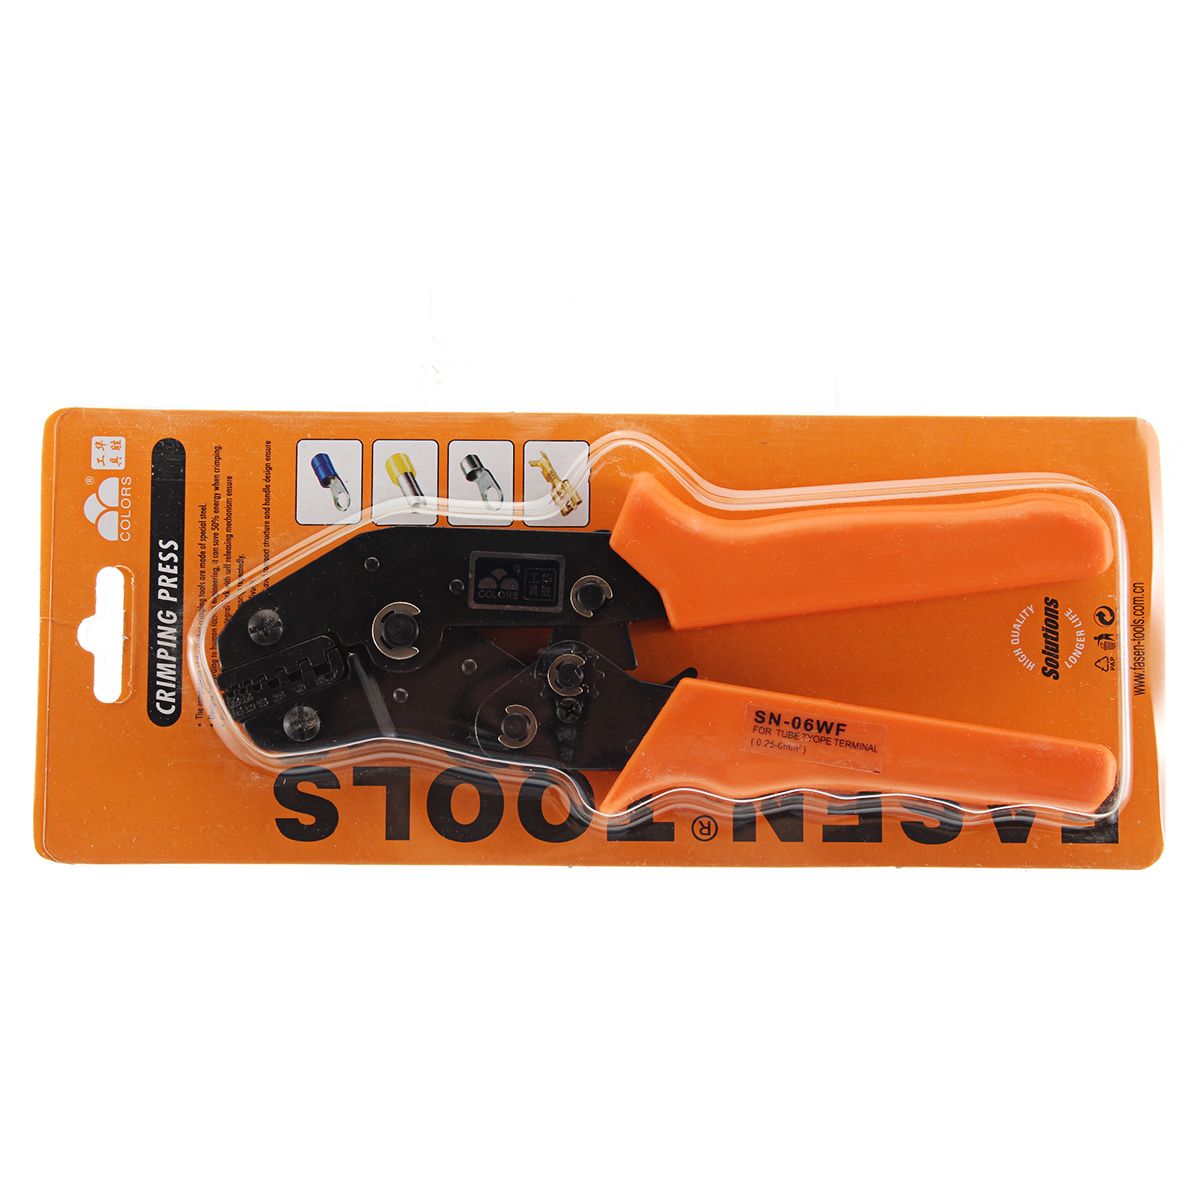 Electrical-Ratchet-Crimping-Pliers-Tool-with-800-Wire-Stripper-Crimper-Terminal-Kit-1243623